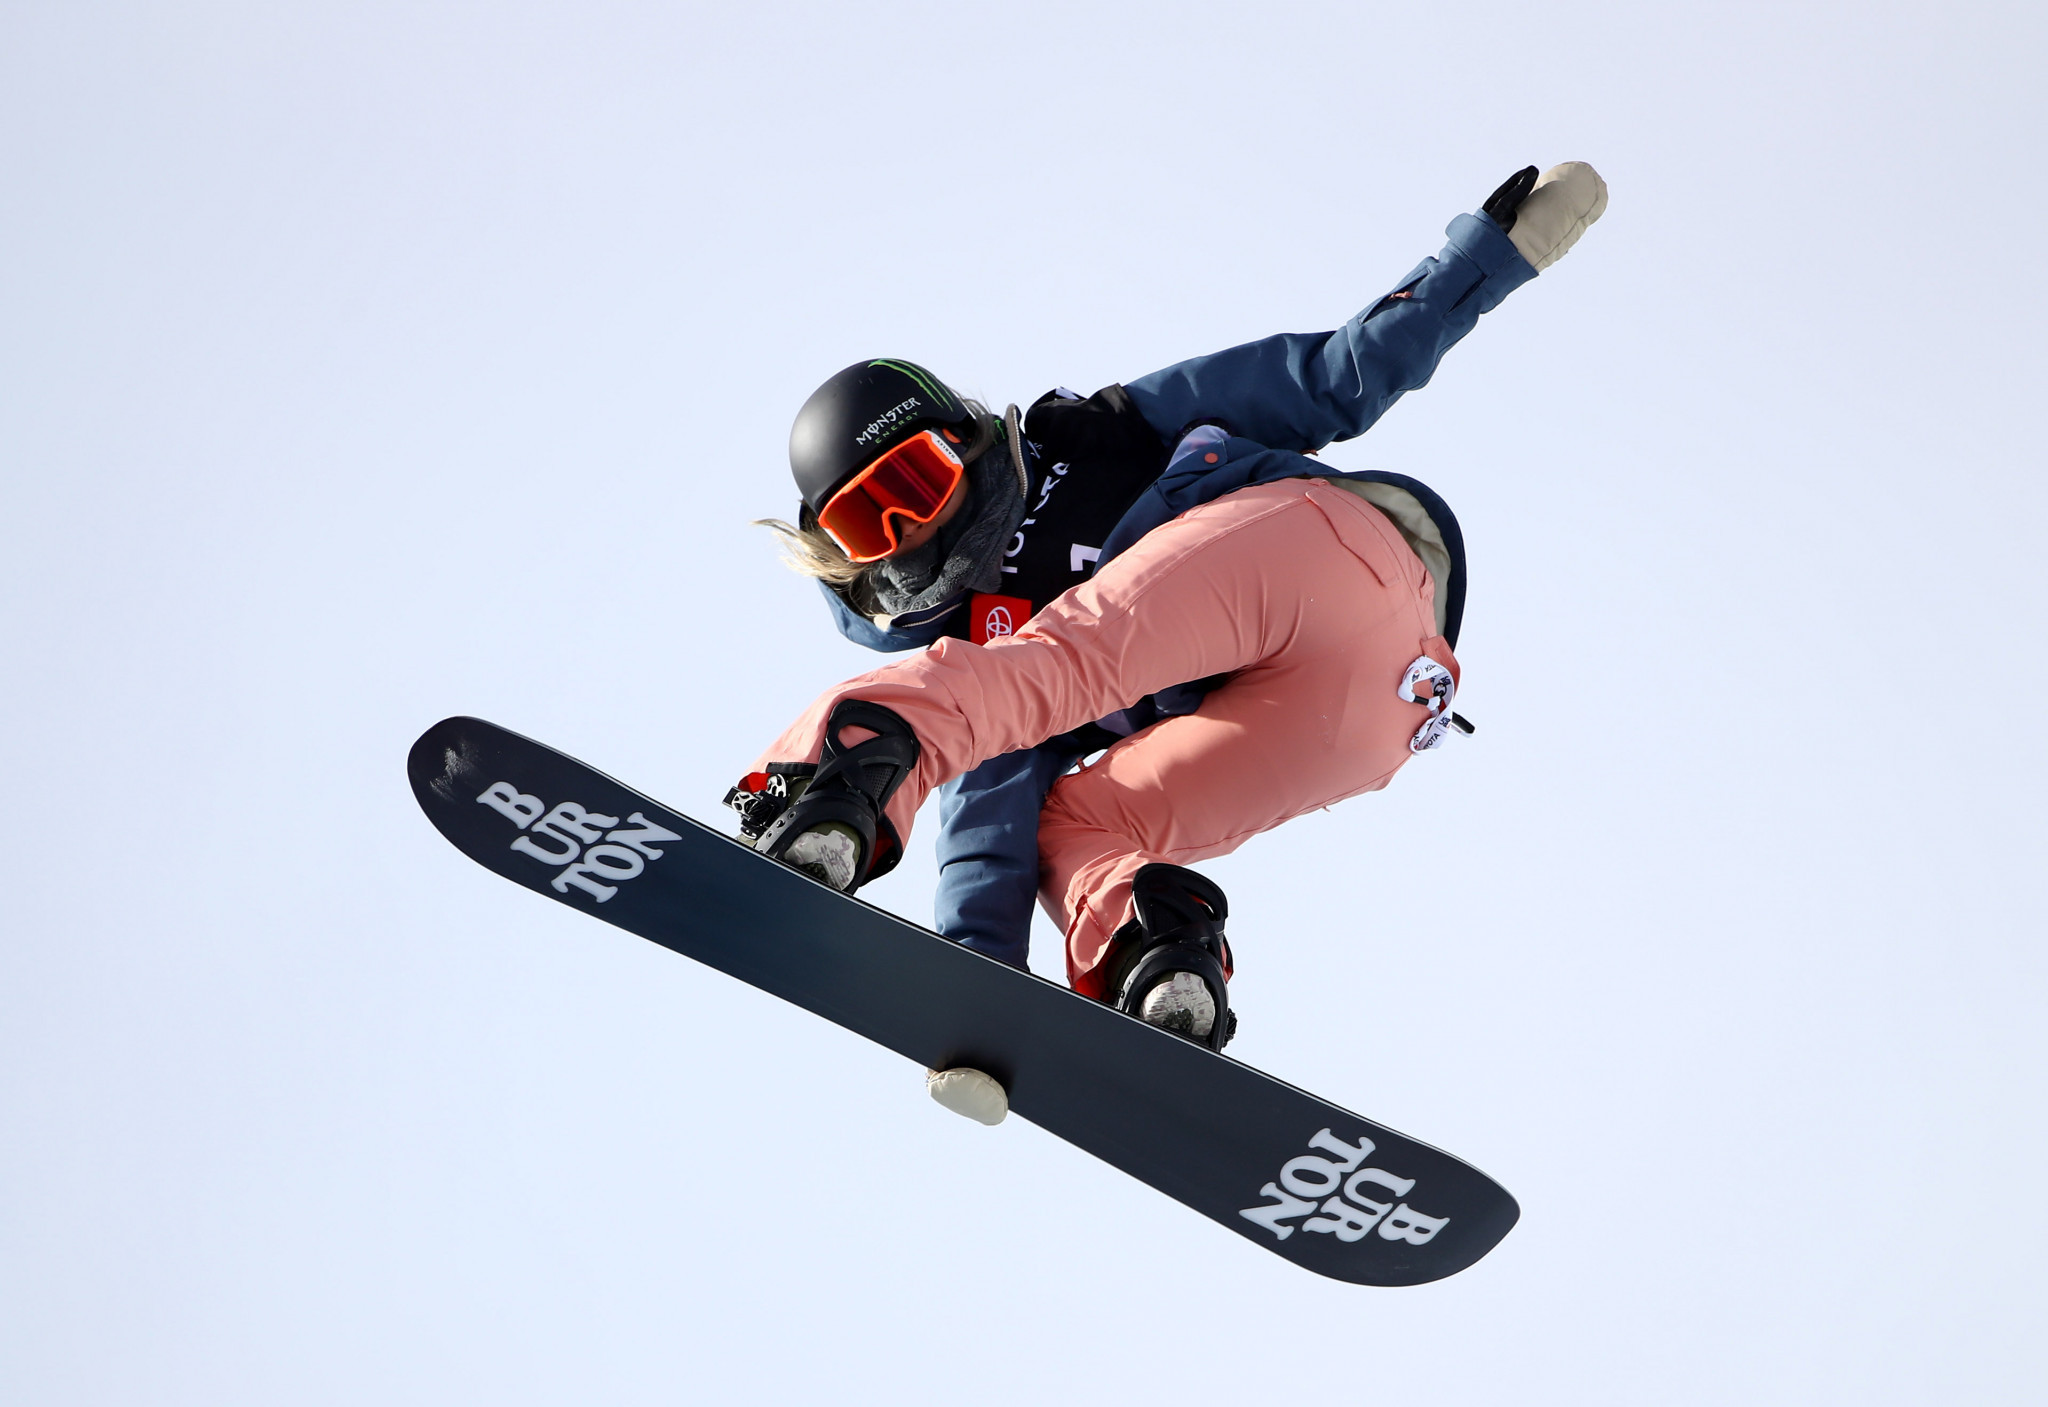 America's Chloe Kim cemented her status as the best halfpipe athlete in the sport with victory at the FIS Freestyle Ski and Snowboard World Championships in Park City ©Getty Images